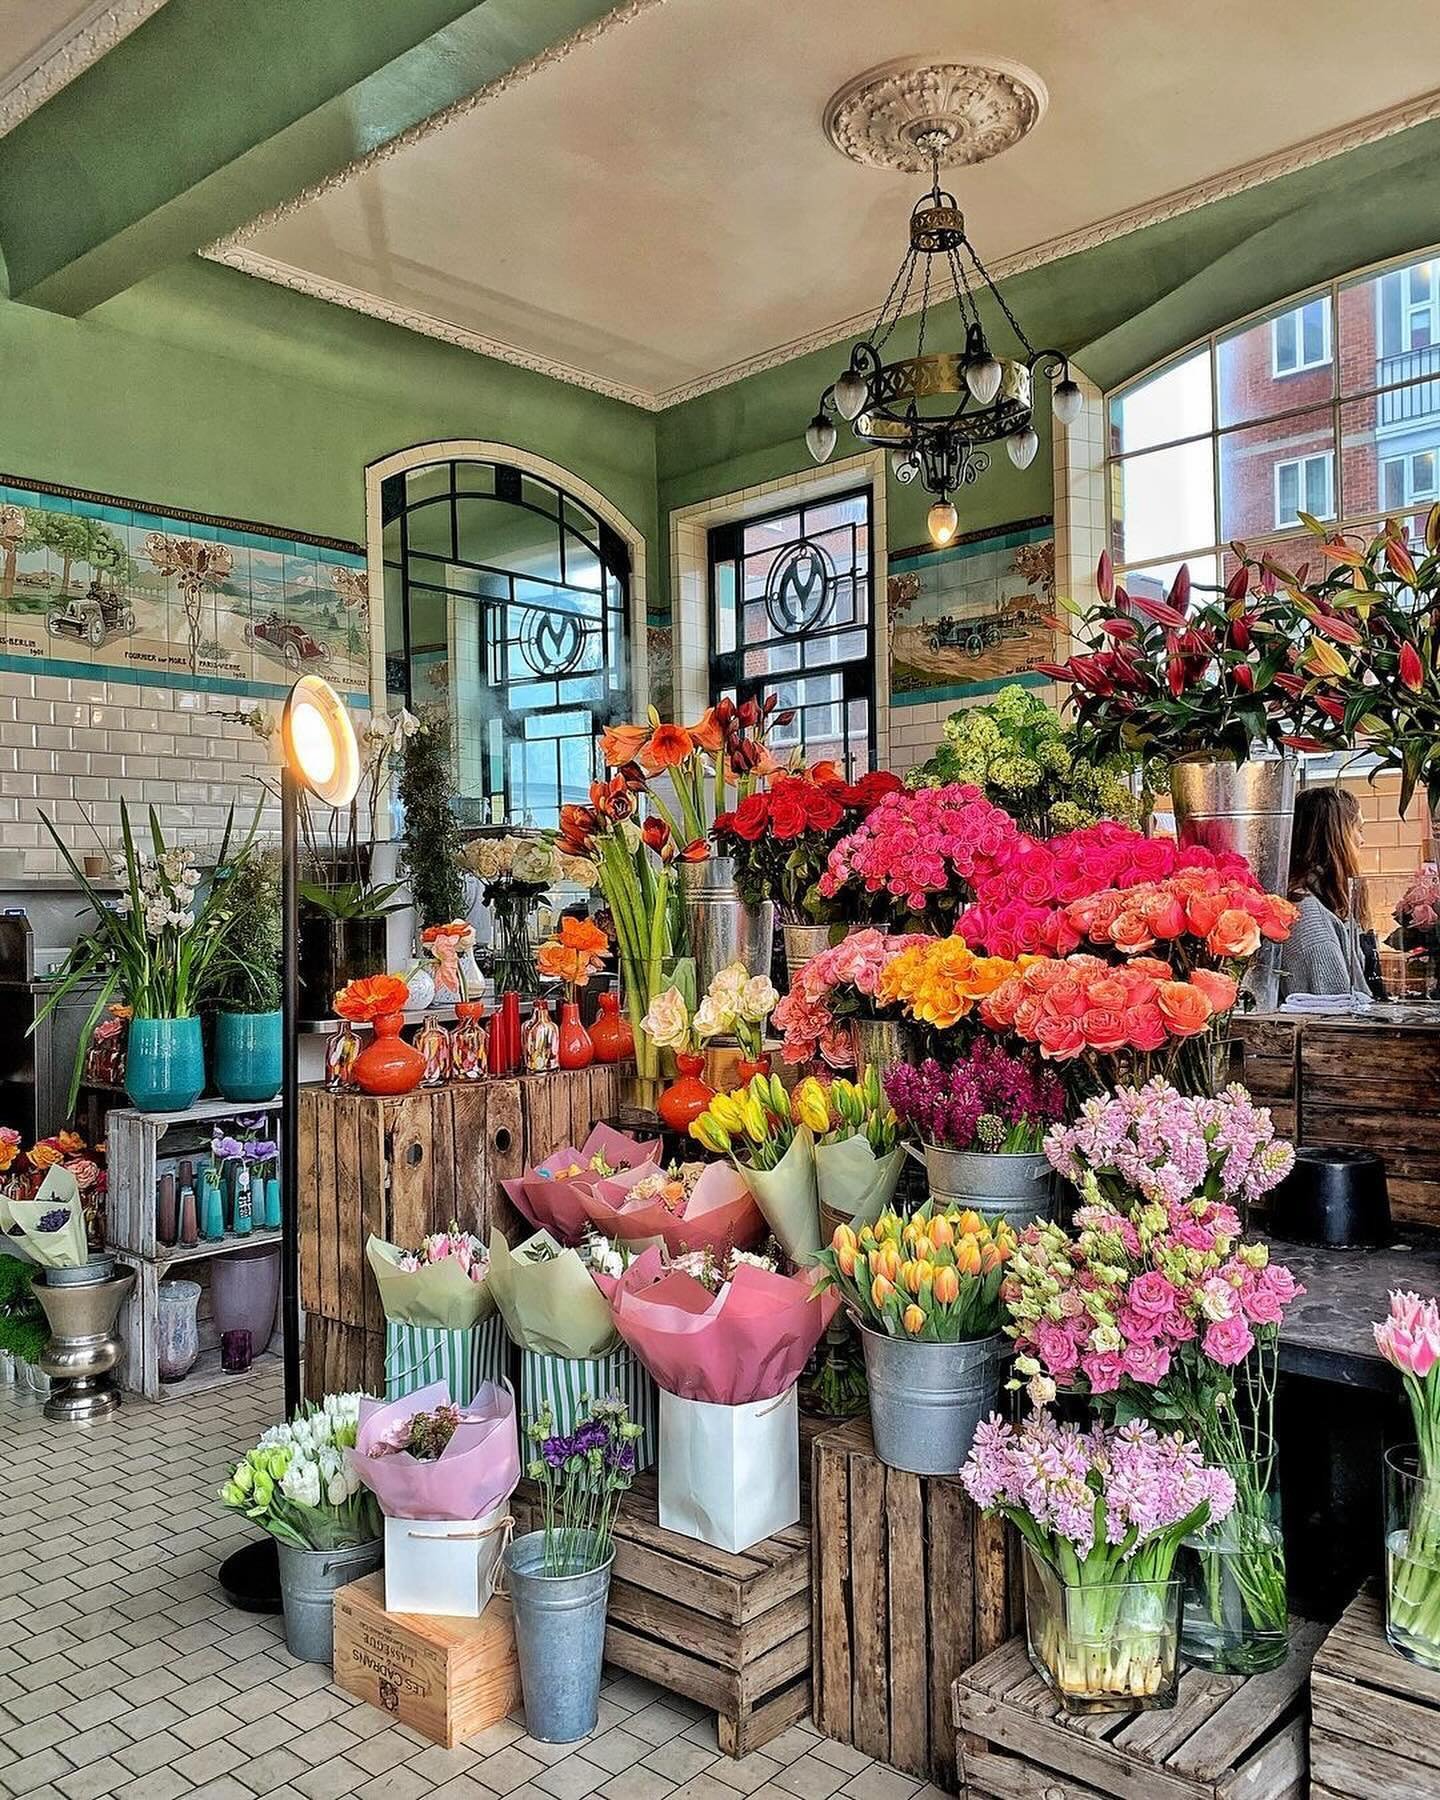 Walking past these colourful arrangements each morning at @petalsatbibendum, below our office, is the perfect reminder (rain or shine...) that spring is here and summer will be hot (ish) on its heals. 🙌. 

📸 @elaineblackall / @dr.rakhi.rajput 

#go